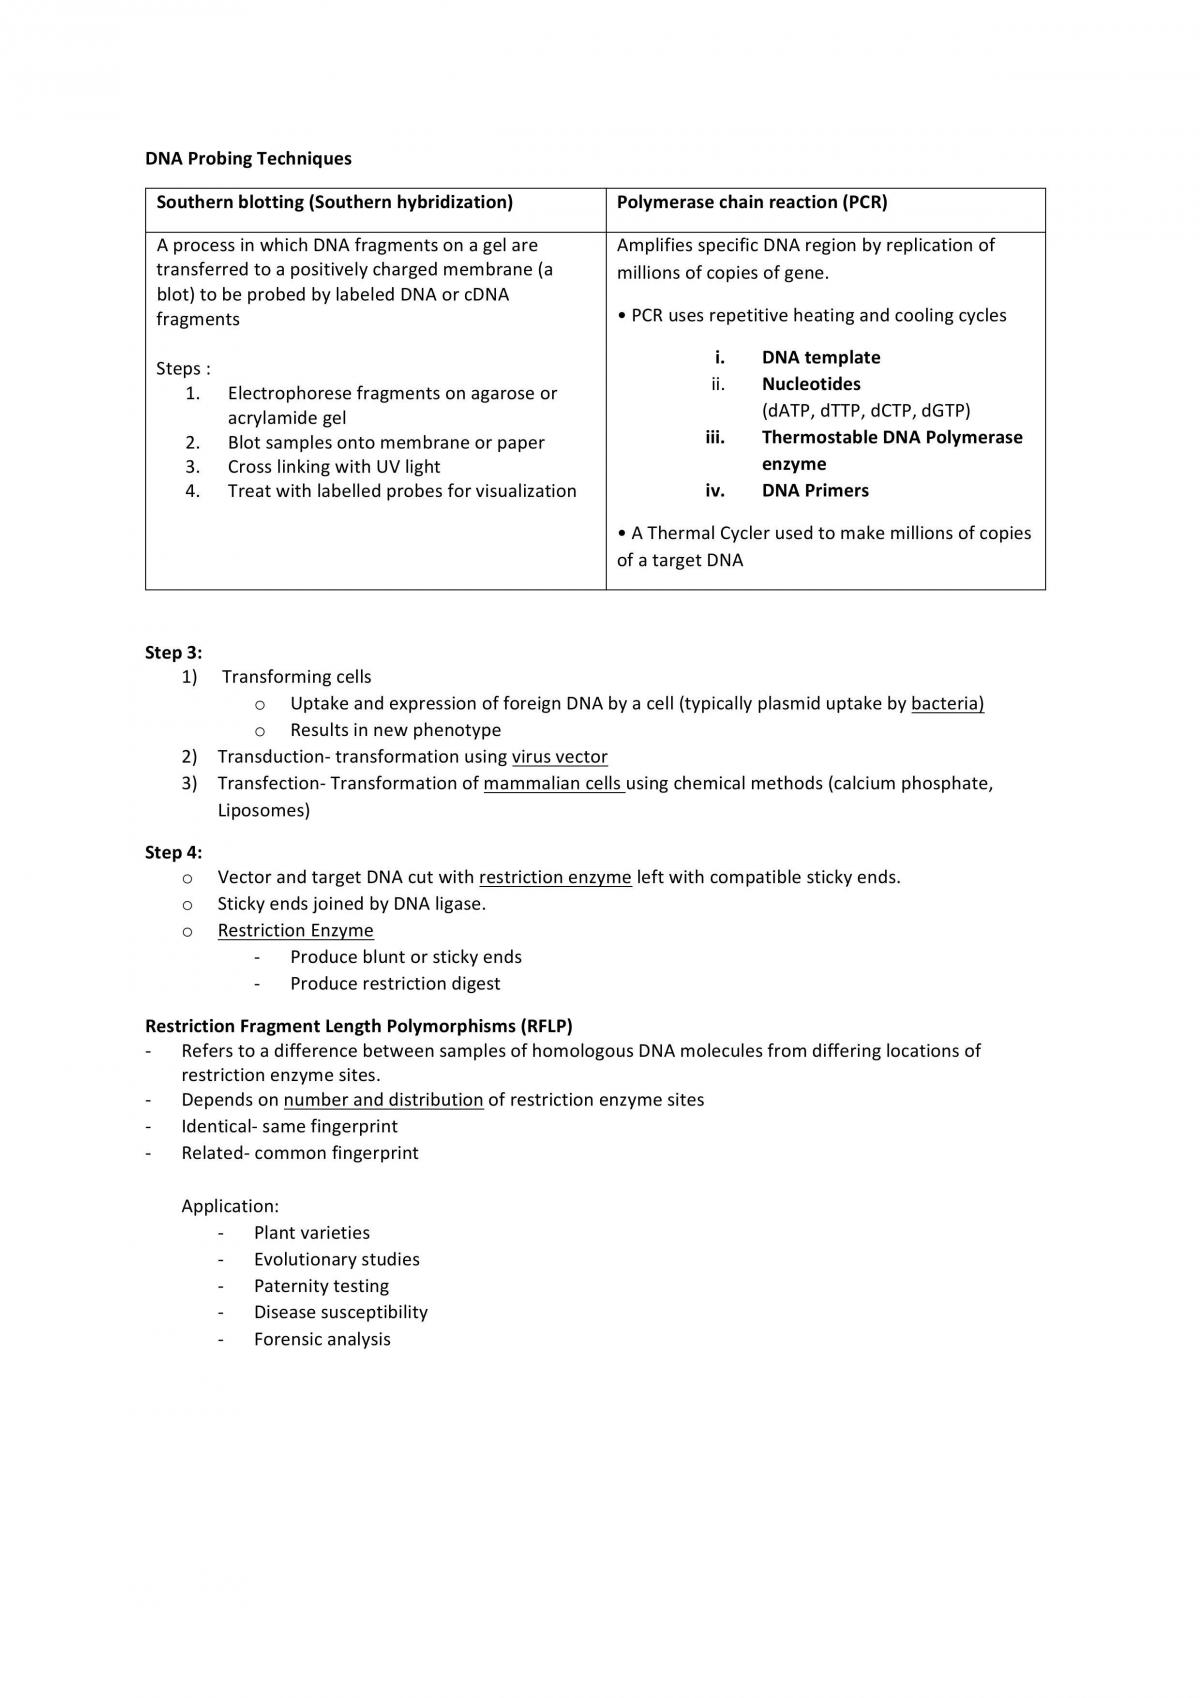 BTH1802 Summary Notes - Page 15